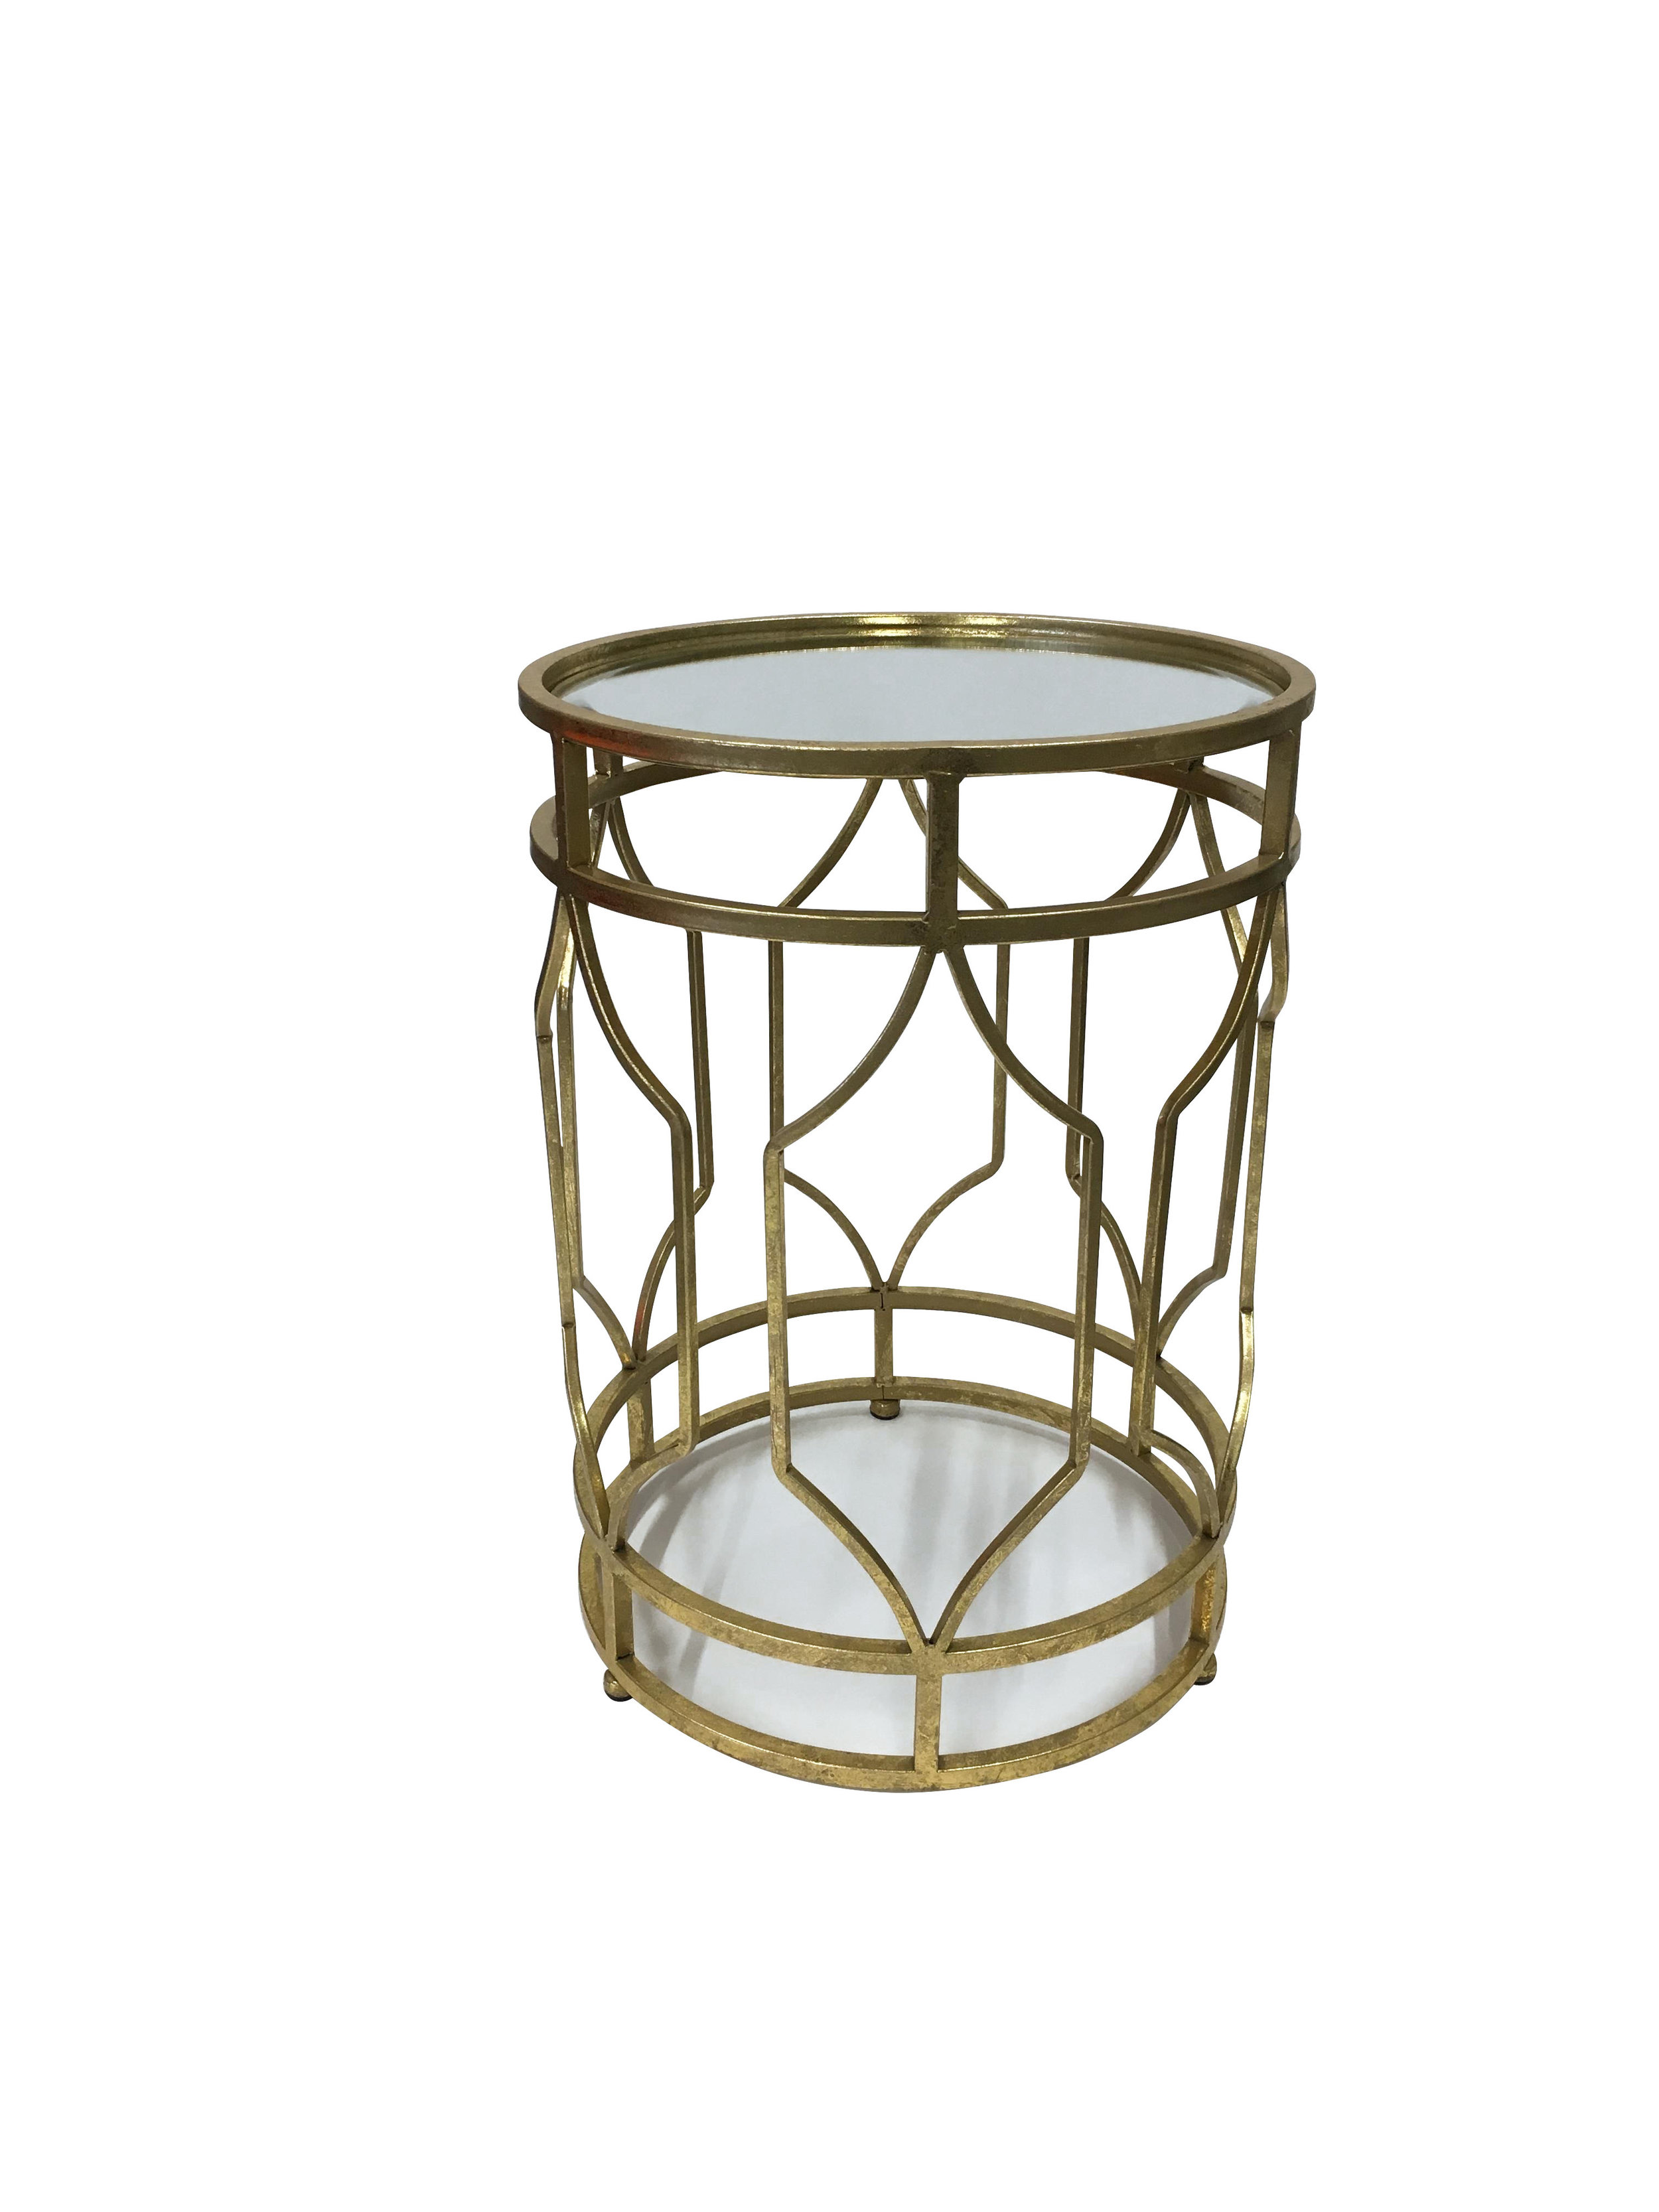 Gold Round Side Table with Mirrored Top1.jpg